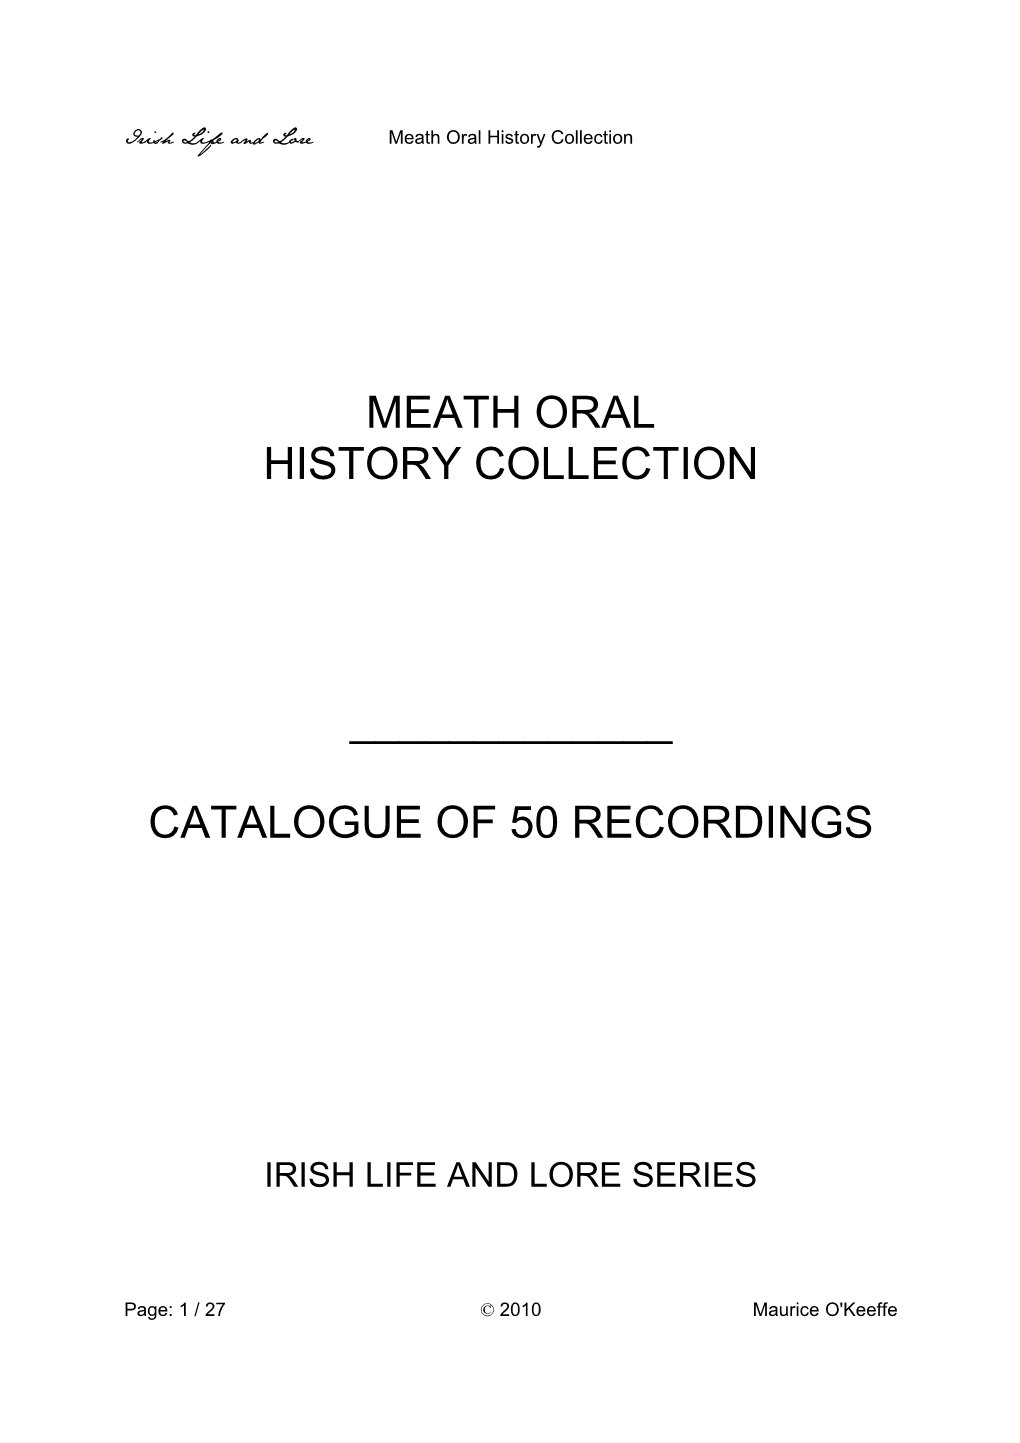 Meath Oral History Collection